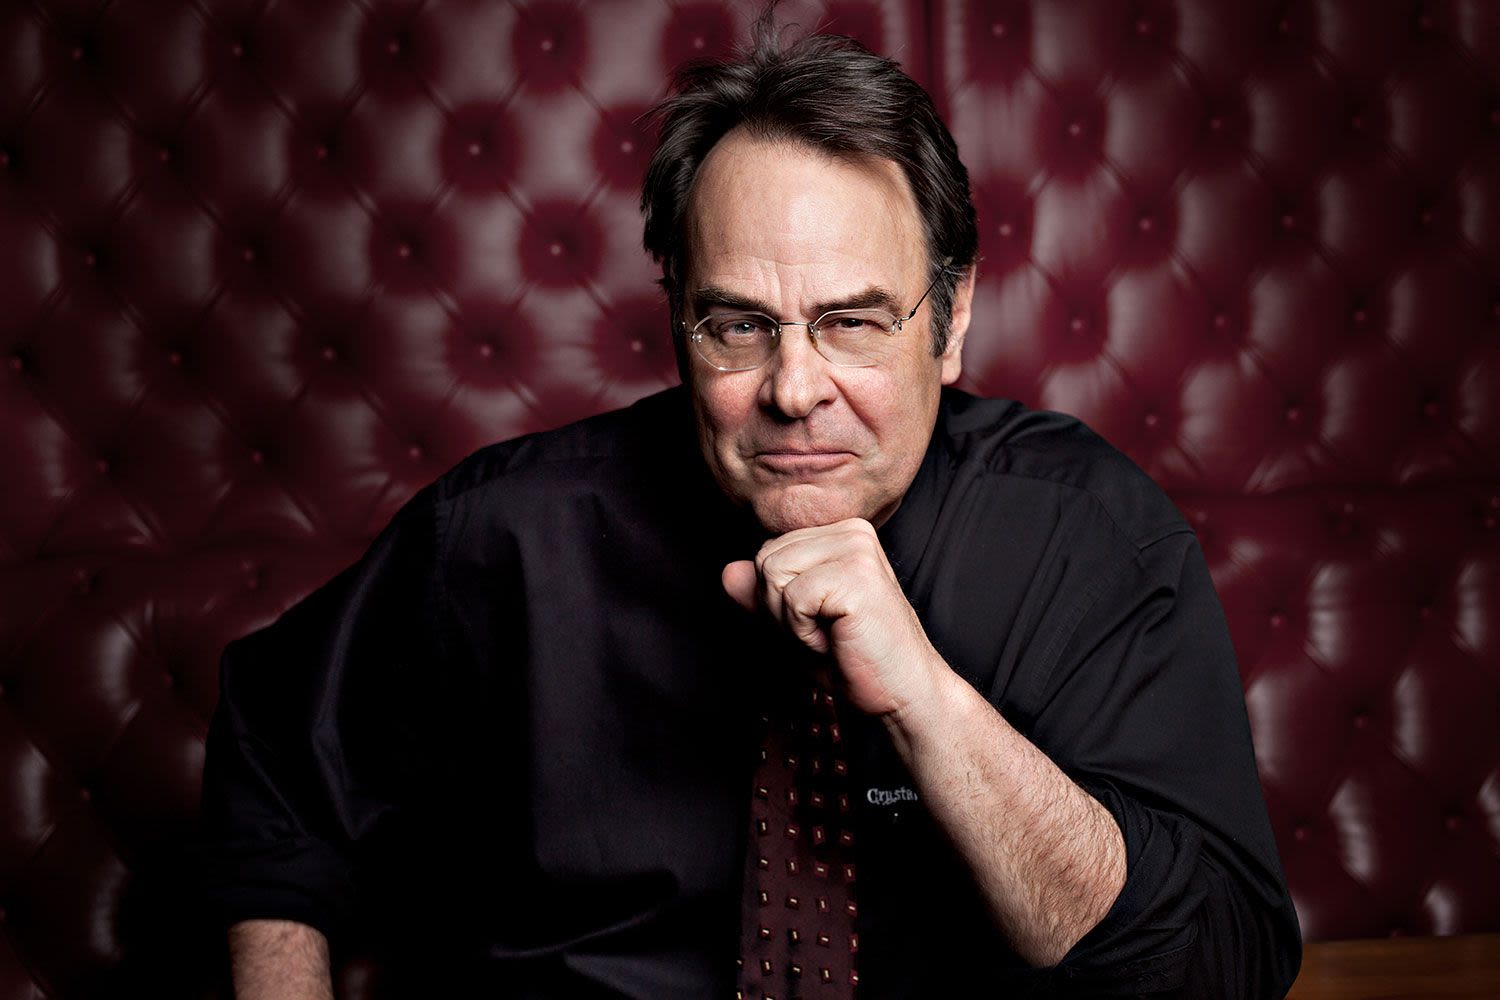 At 72, Dan Aykroyd Plans to 'Really Live' for His Children Now: 'I Want to Accomplish Their Happiness'